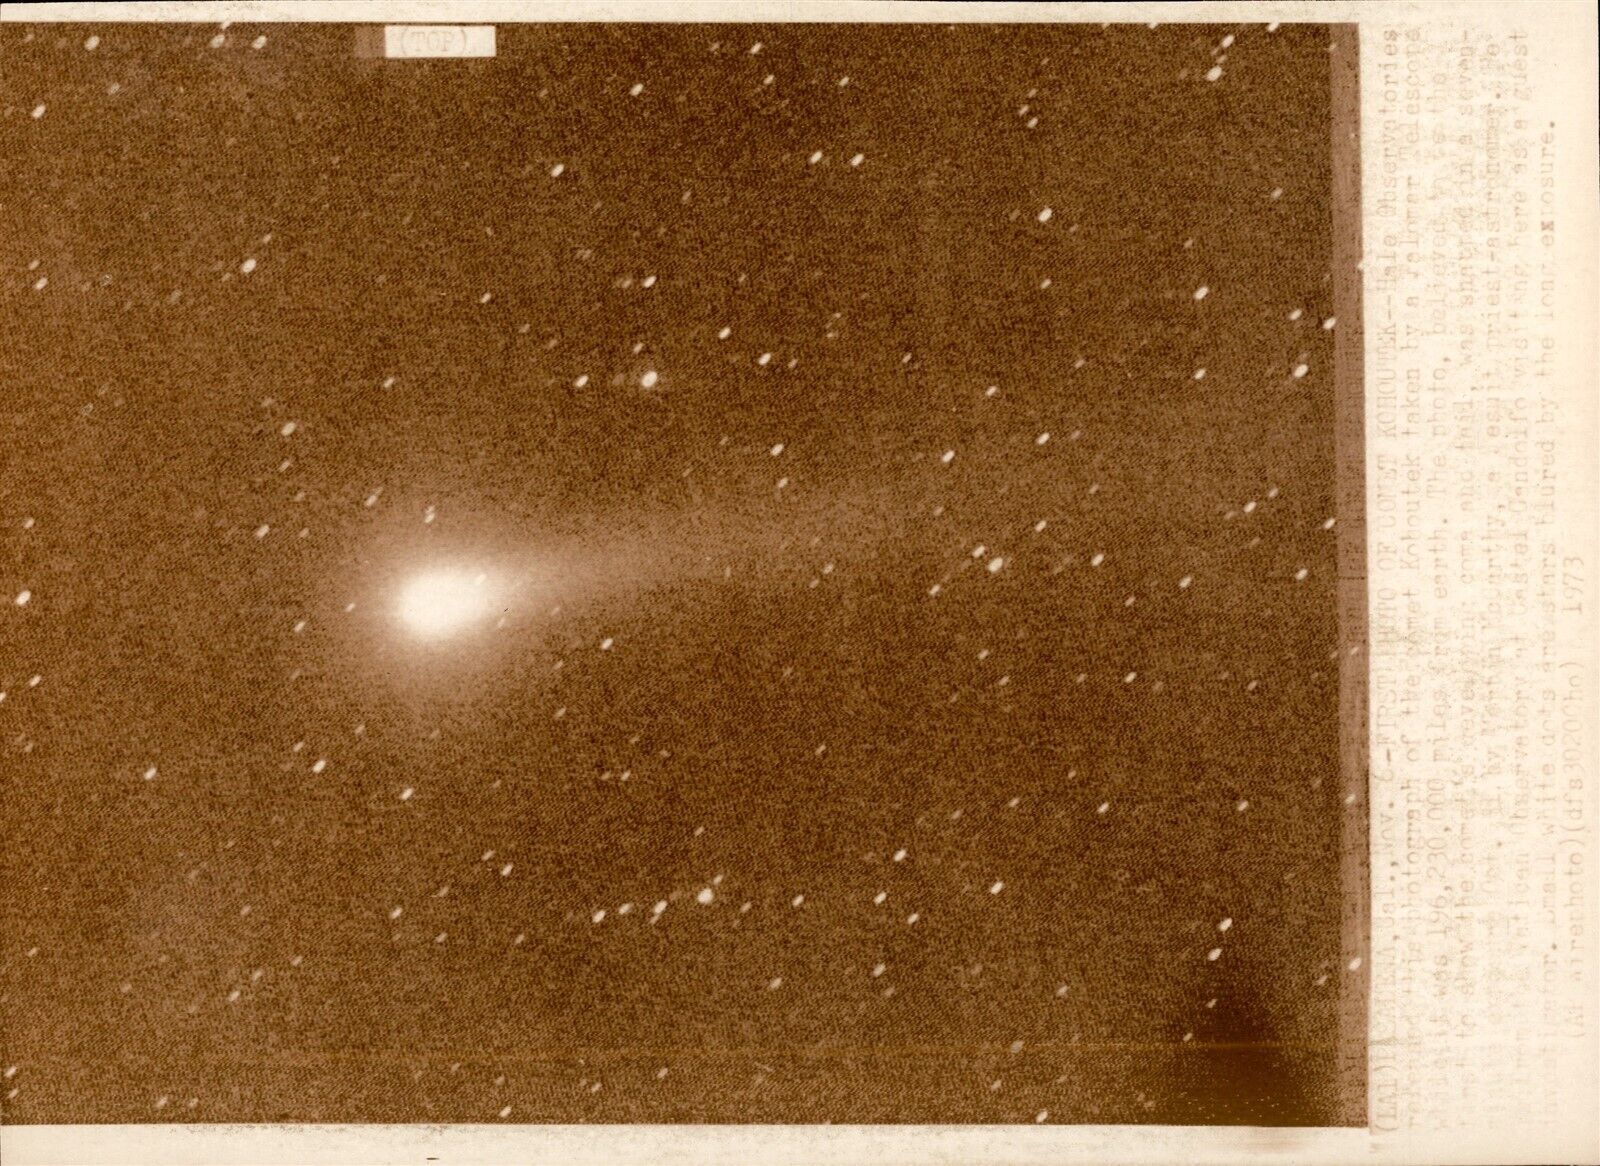 LD335 1973 AP Wire Photo FIRST IMAGE OF COMET KOHOUTEK FROM HALE OBSERVATORY